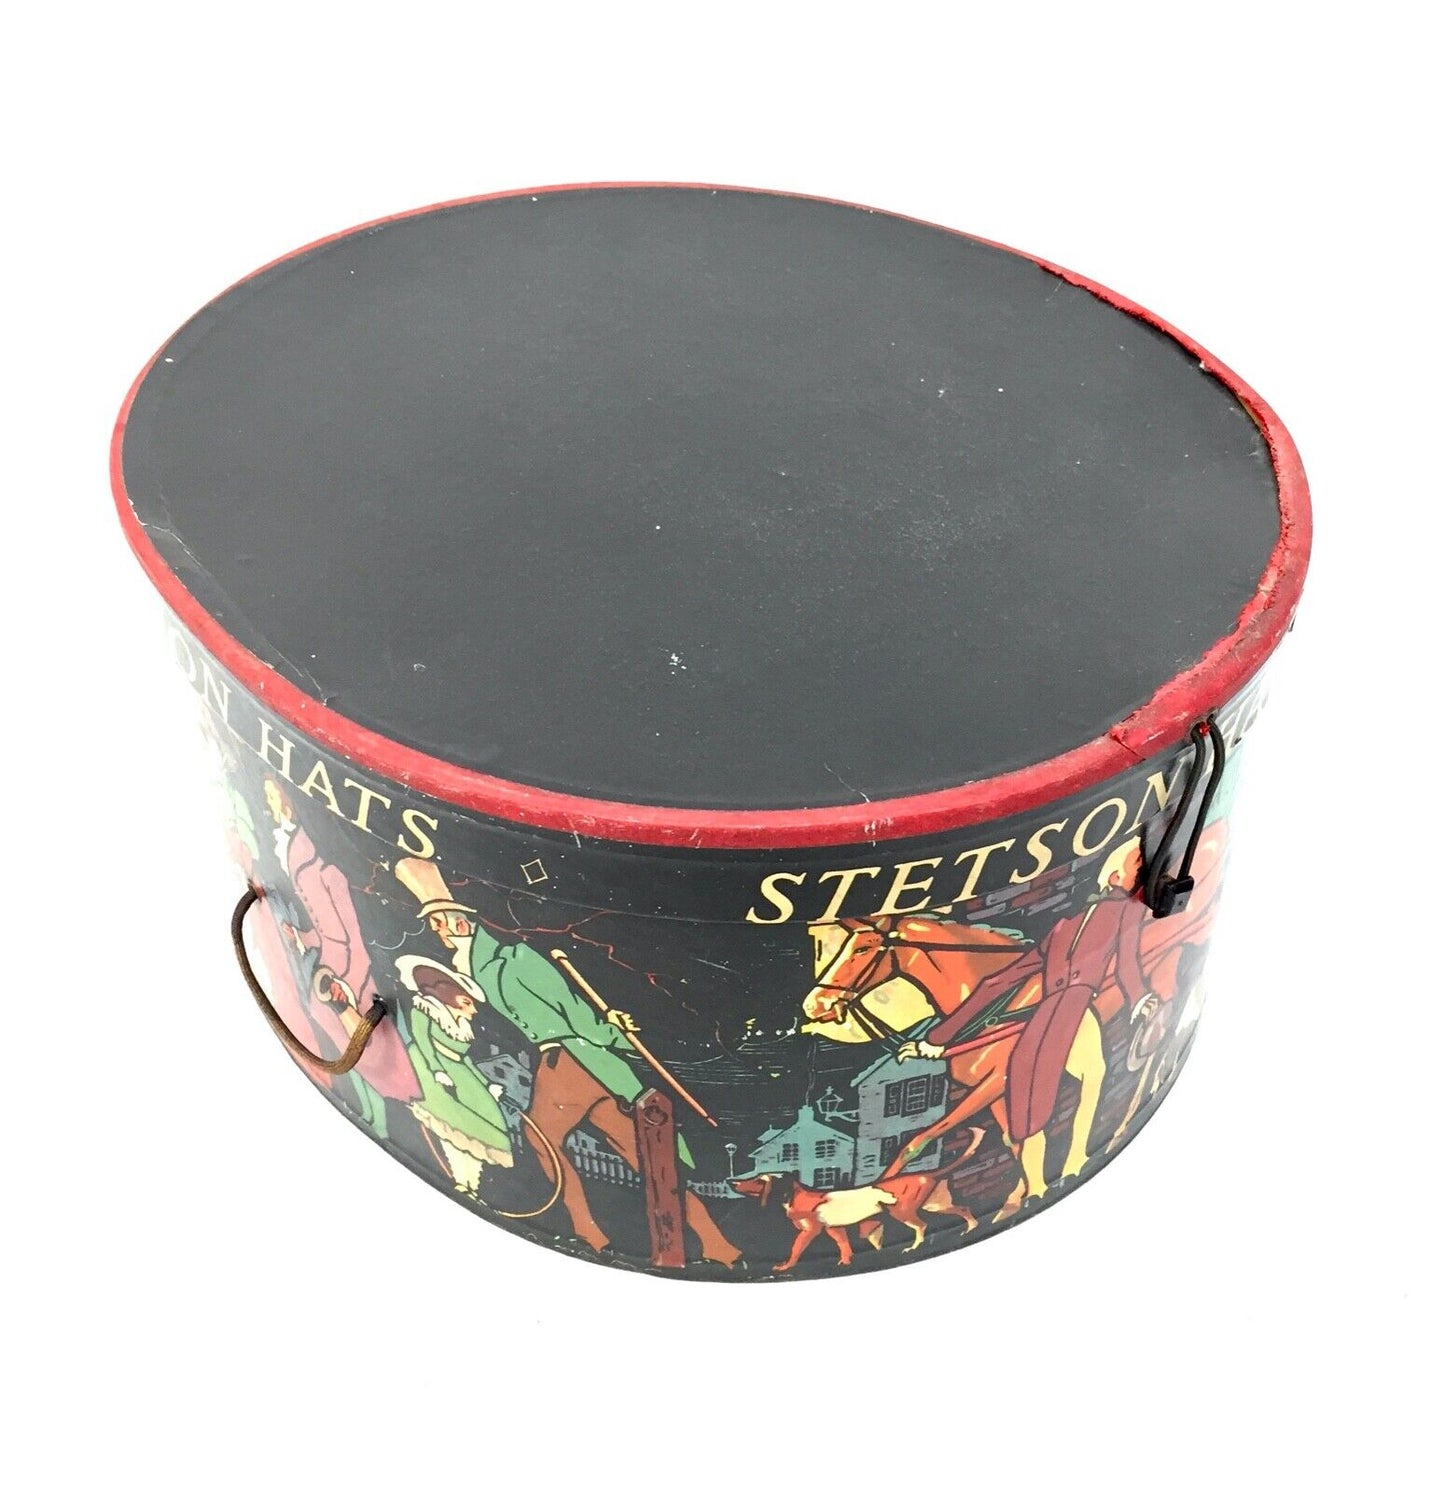 Antique Advertising - 1930s Decorated Victorian Scene Hat Box by Stetson Hats